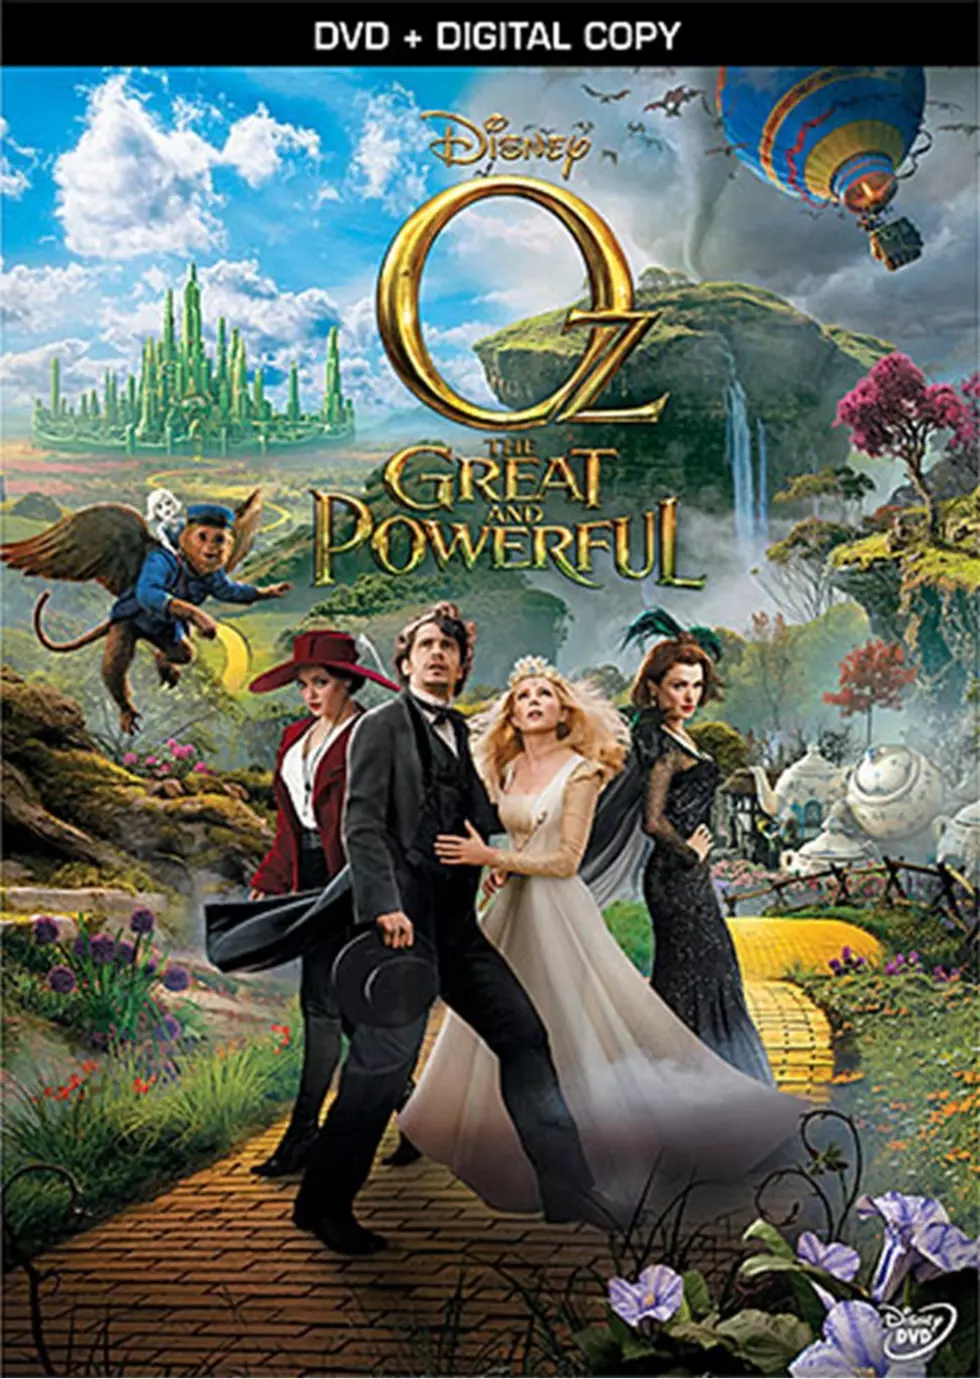 This Friday Night&#8217;s FREE Downtown Movie Is &#8221; Oz, The Great And Powerful&#8221;